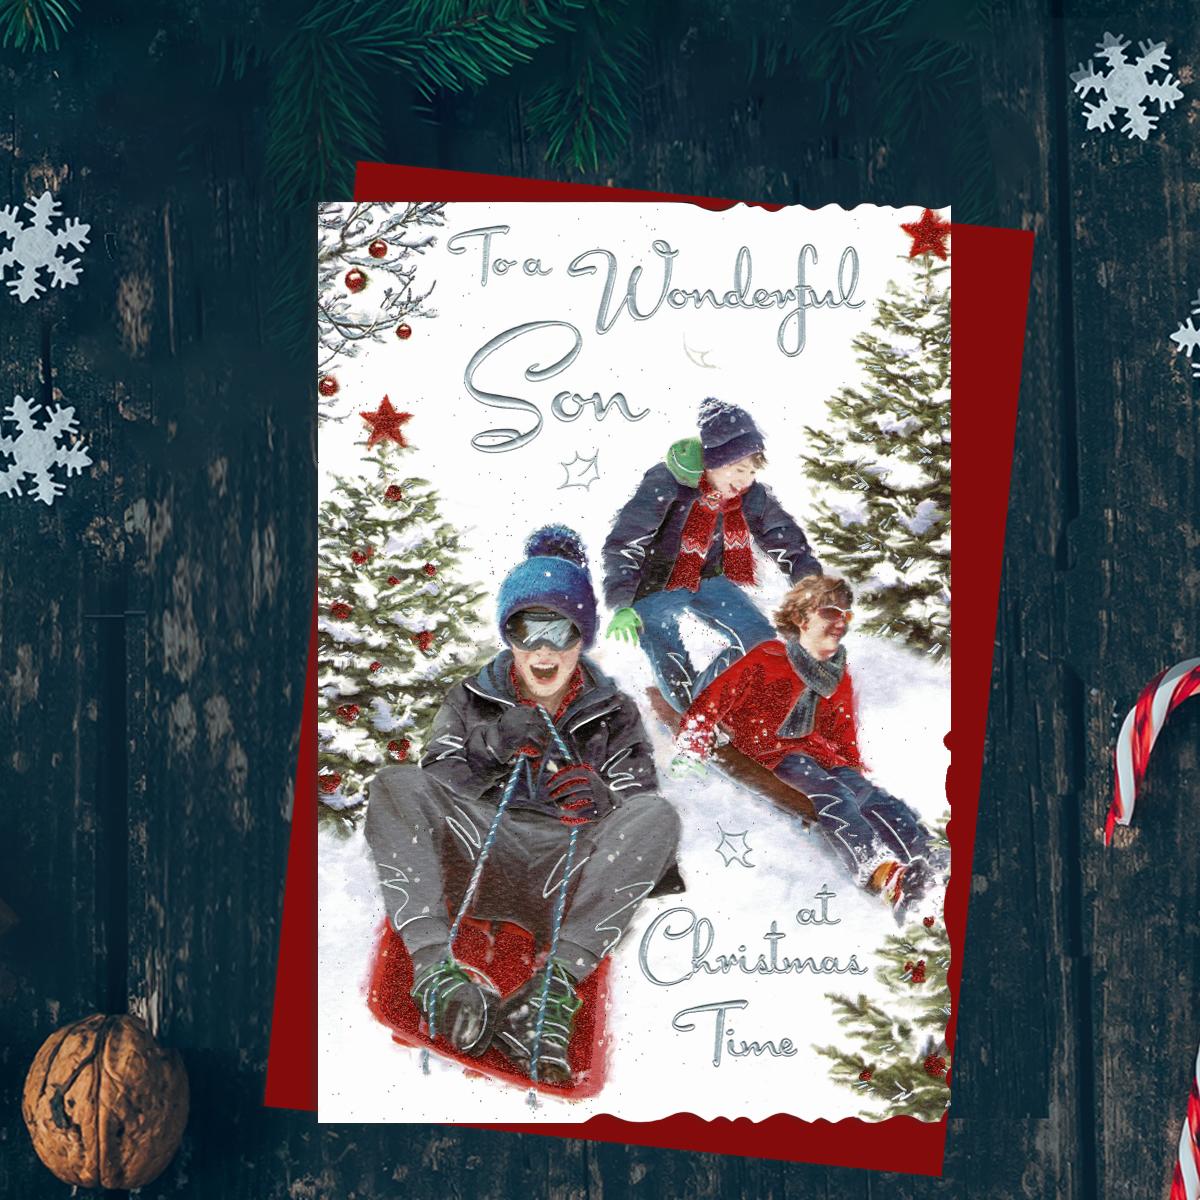 To A Wonderful Son At Christmas Time Featuring Three Boys On Sledges In The Snow. Finished With Silver Foil lettering, Red Glitter And Red Envelope